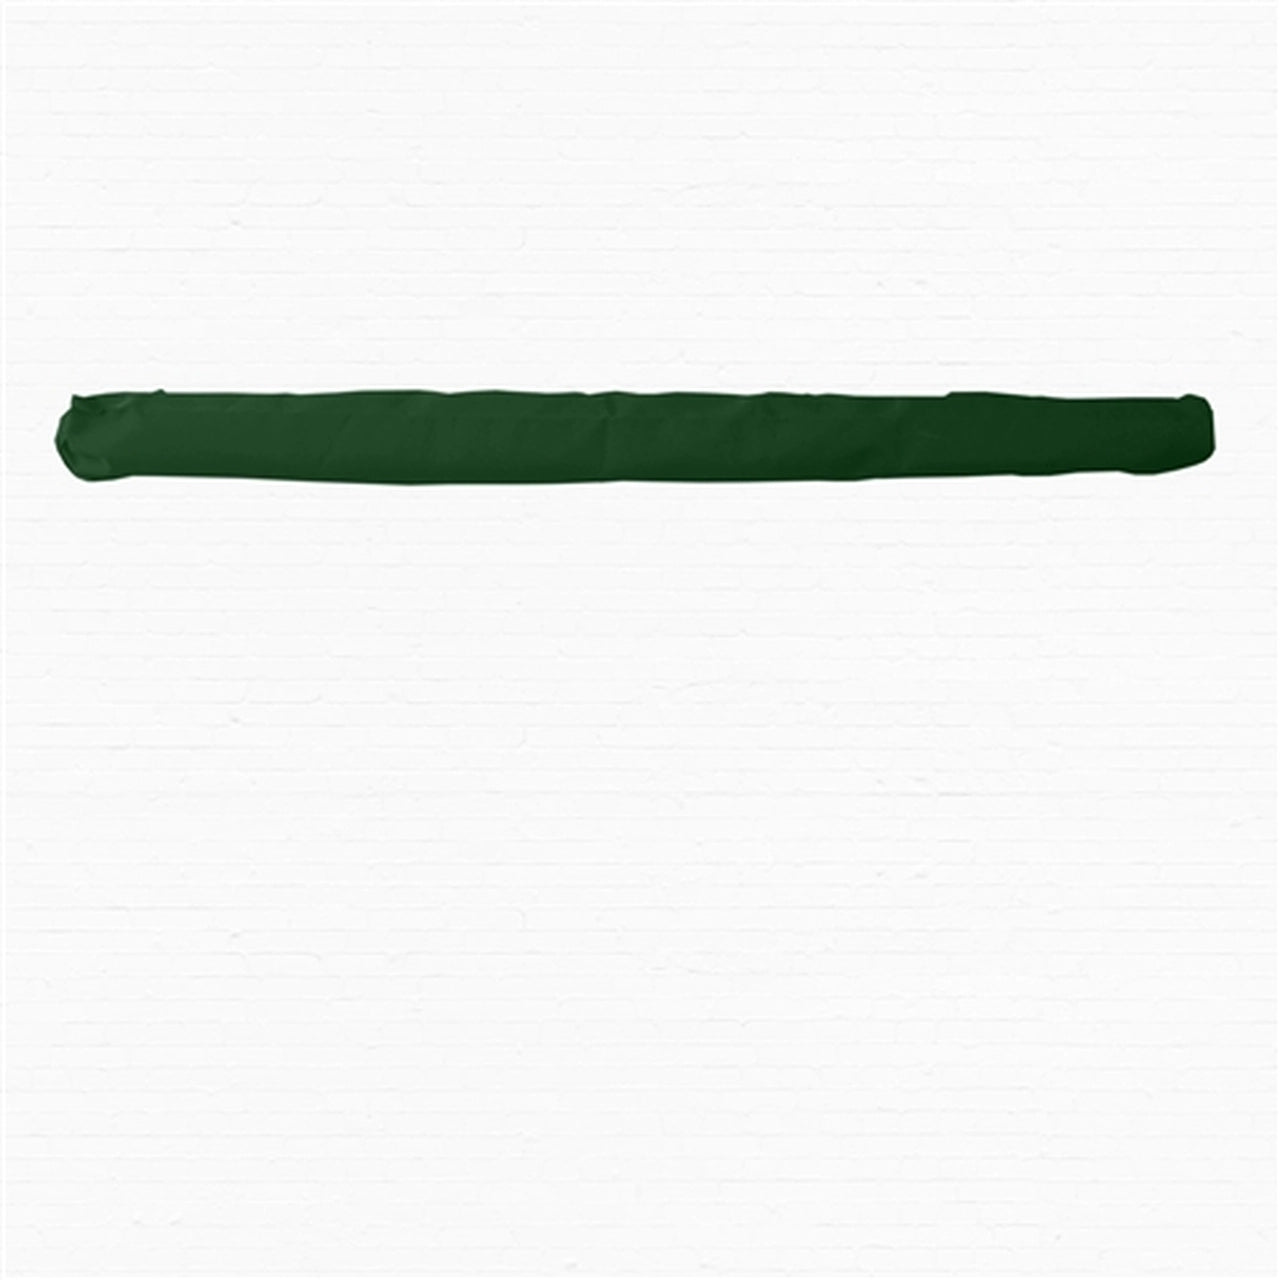 Aleko Protective Awning Cover - 13 x 10 Feet - Green